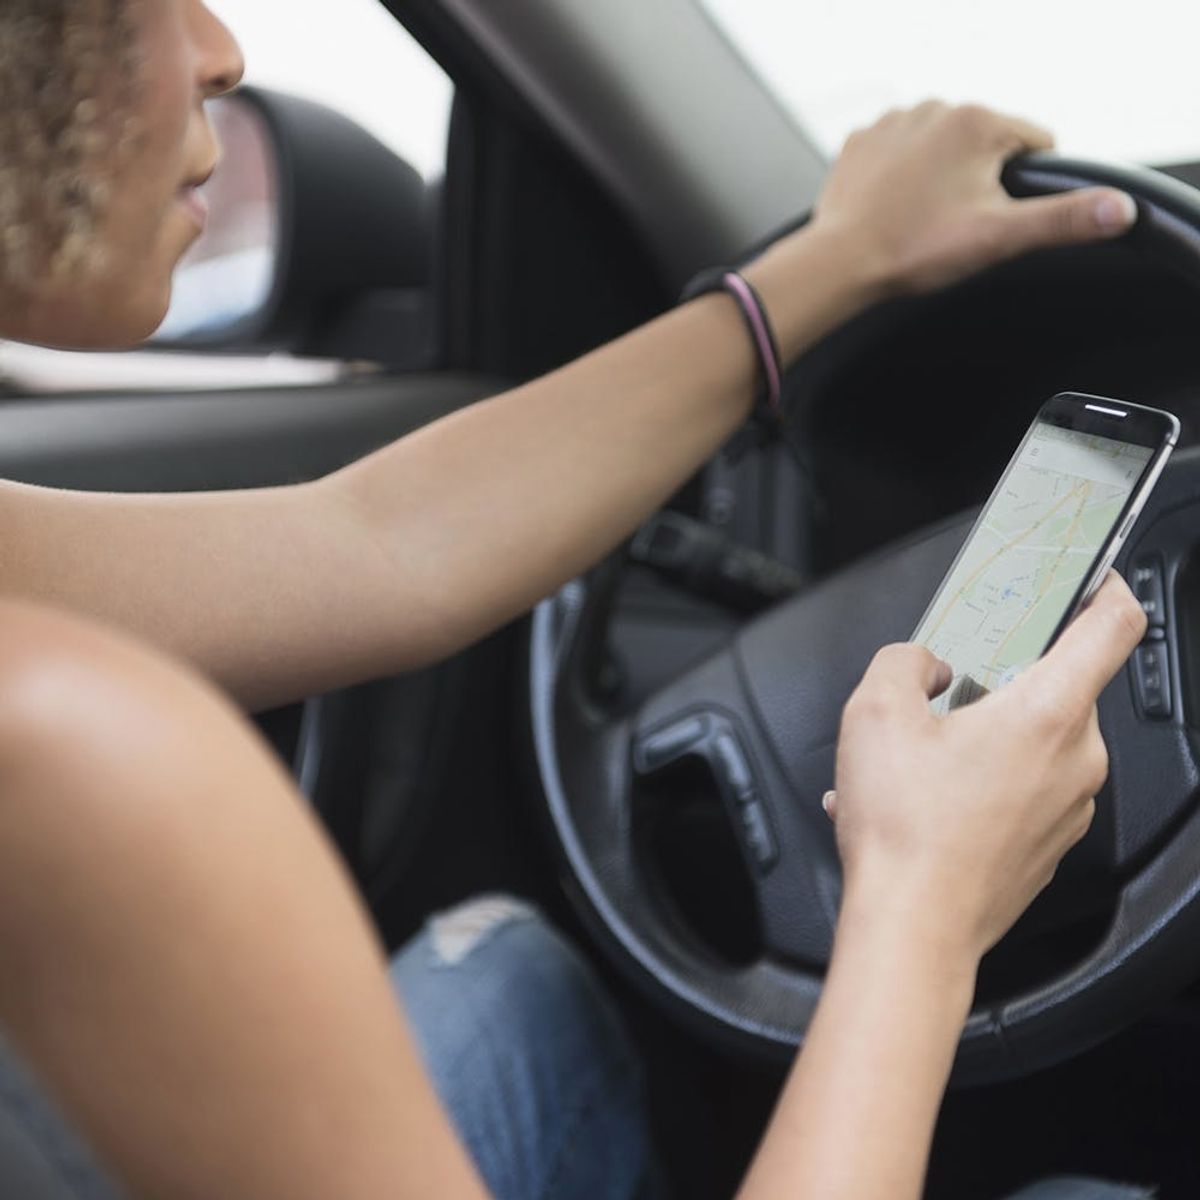 This Trick Makes Using Your Phone While Driving WAY Safer